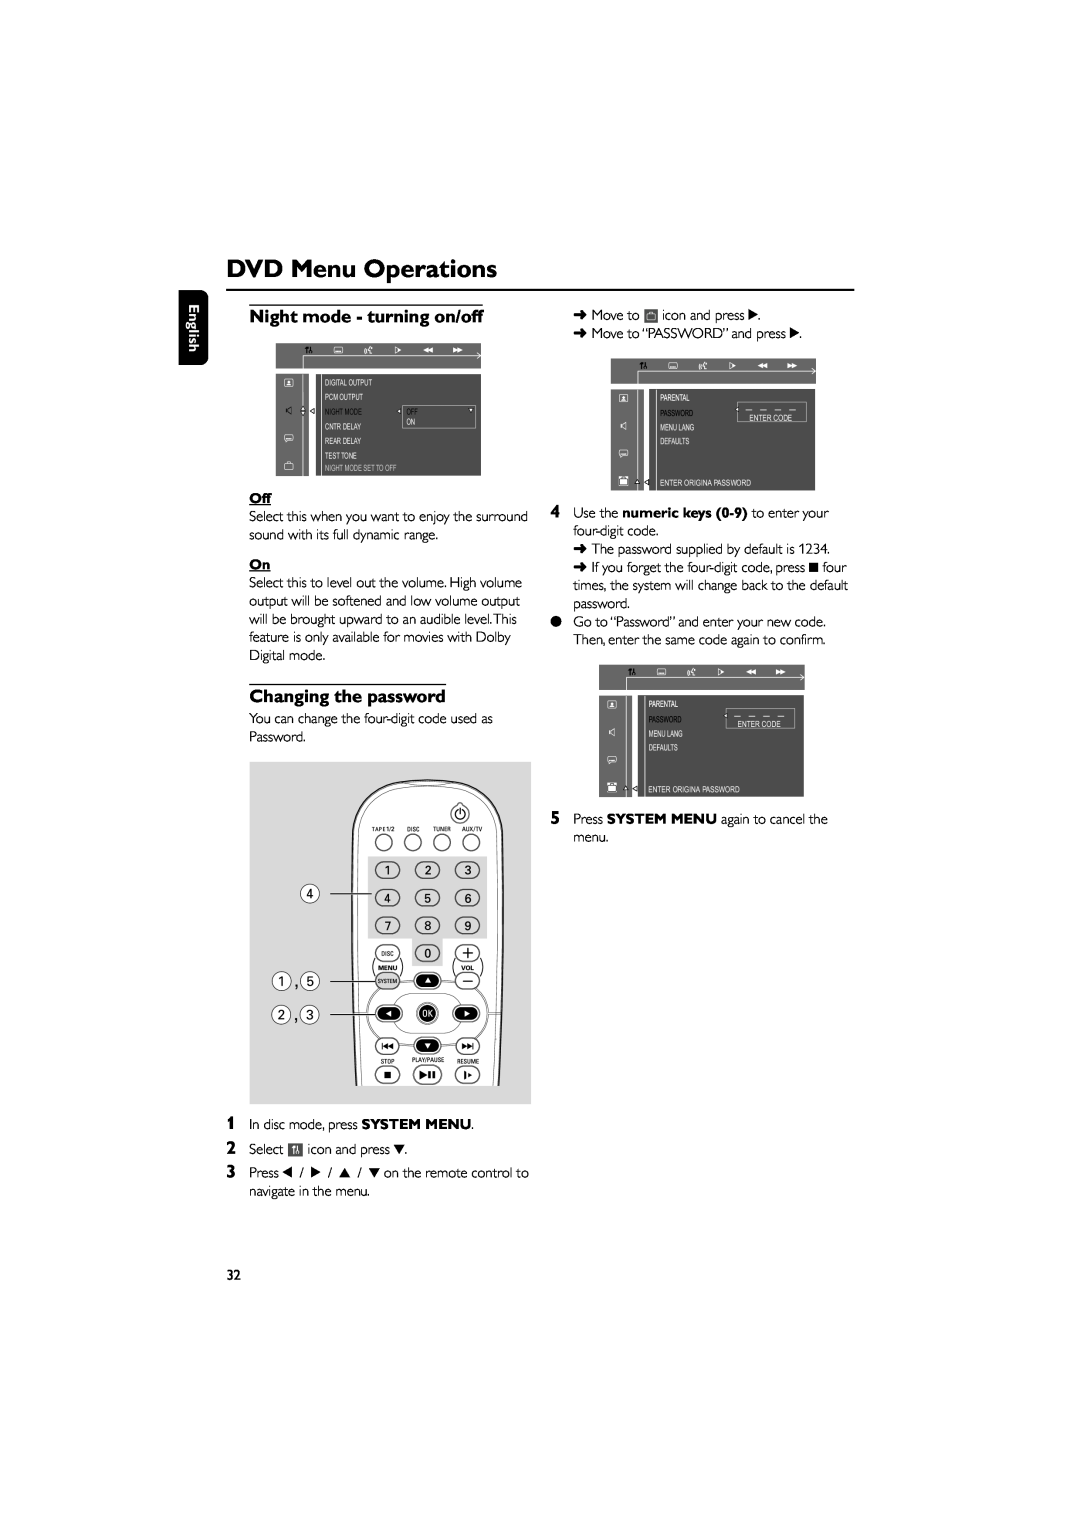 Philips FW-D550 manual 4 1,5 2,3, Night mode - turning on/off, Changing the password, DVD Menu Operations, English 